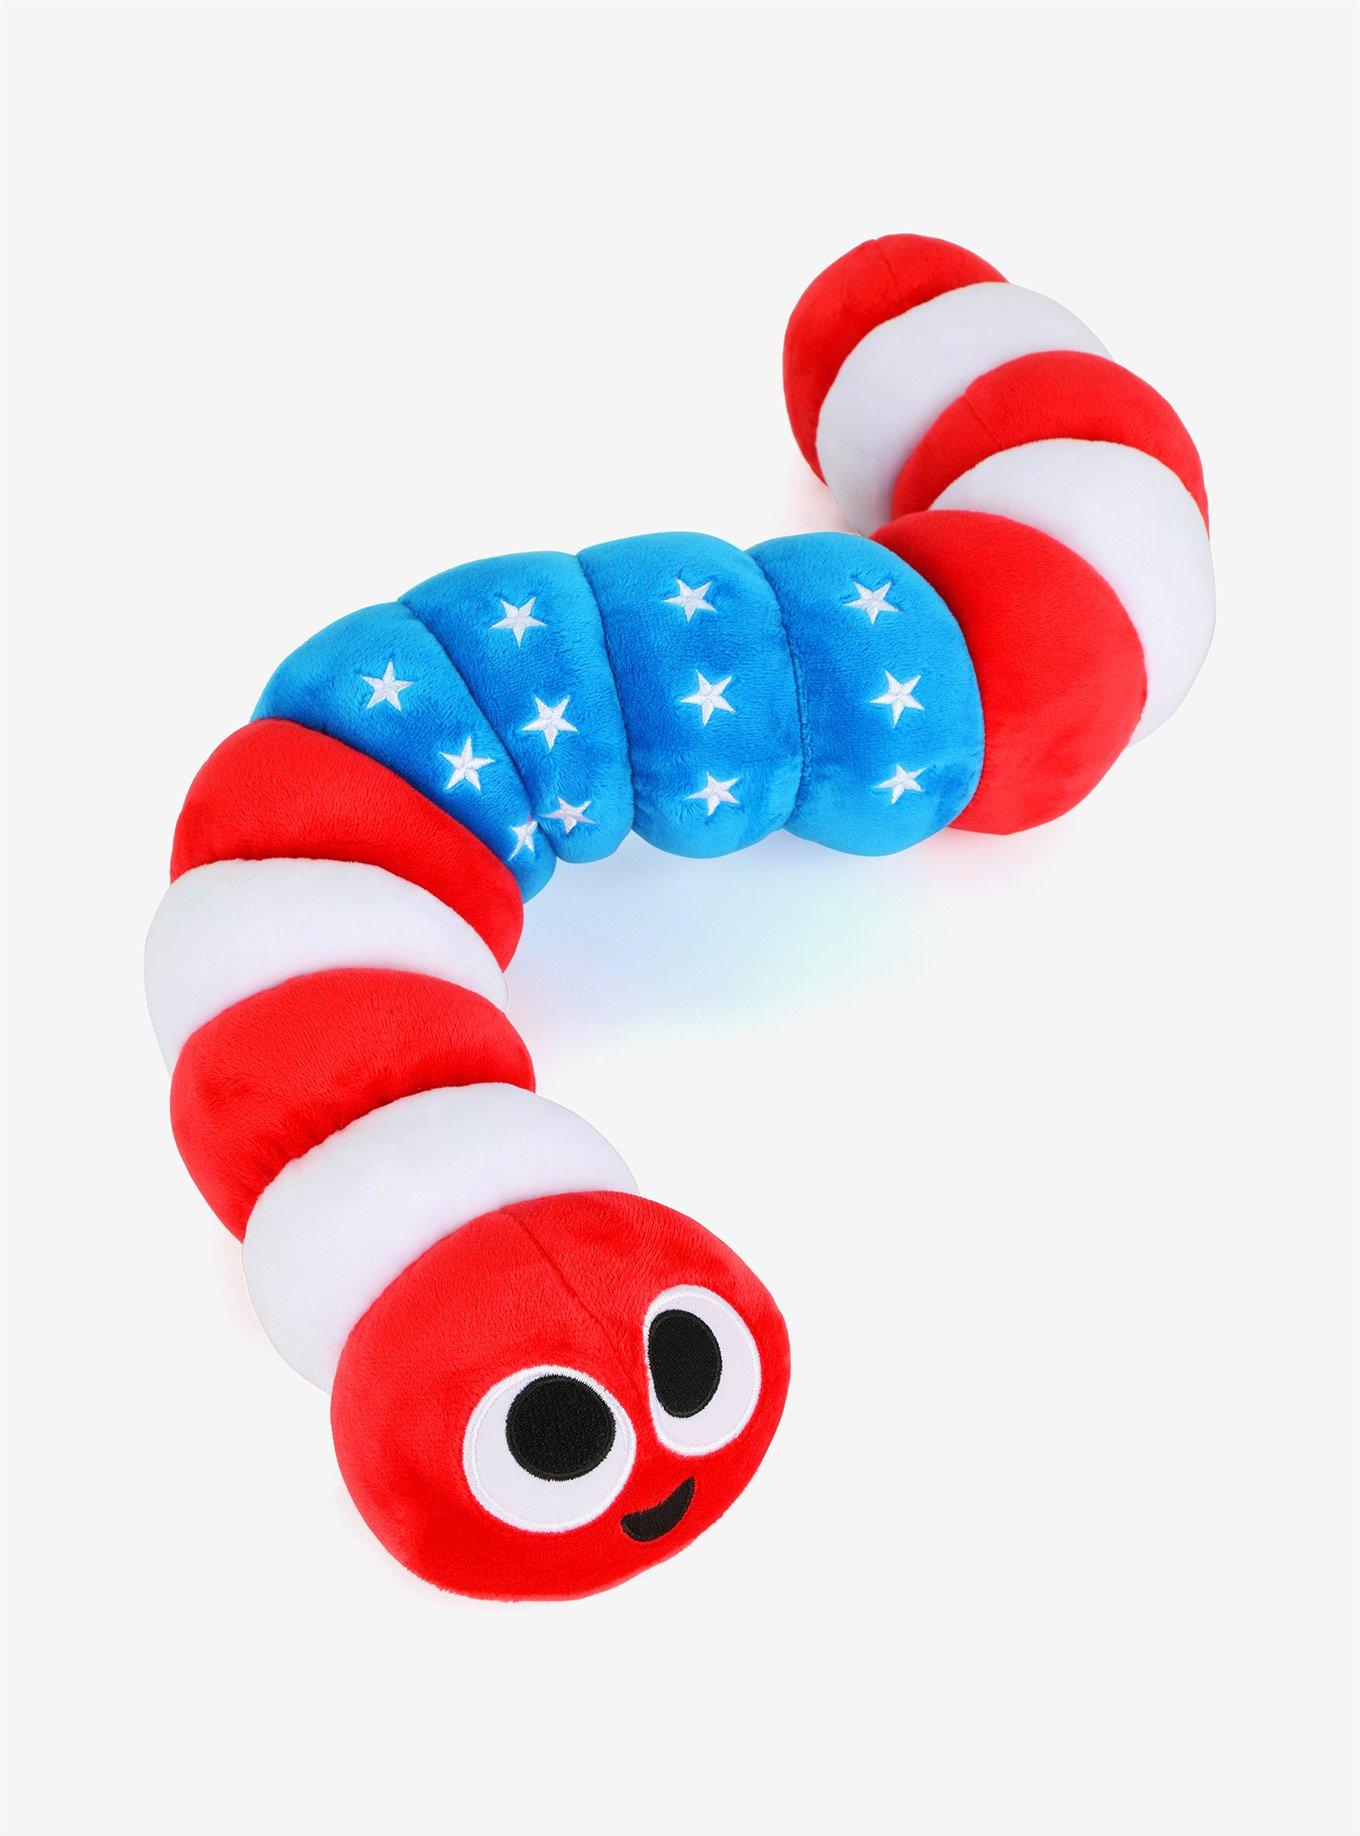 Slither.io Assorted Styles Bendable 4 Inch Plush Toy - 1 Supplied